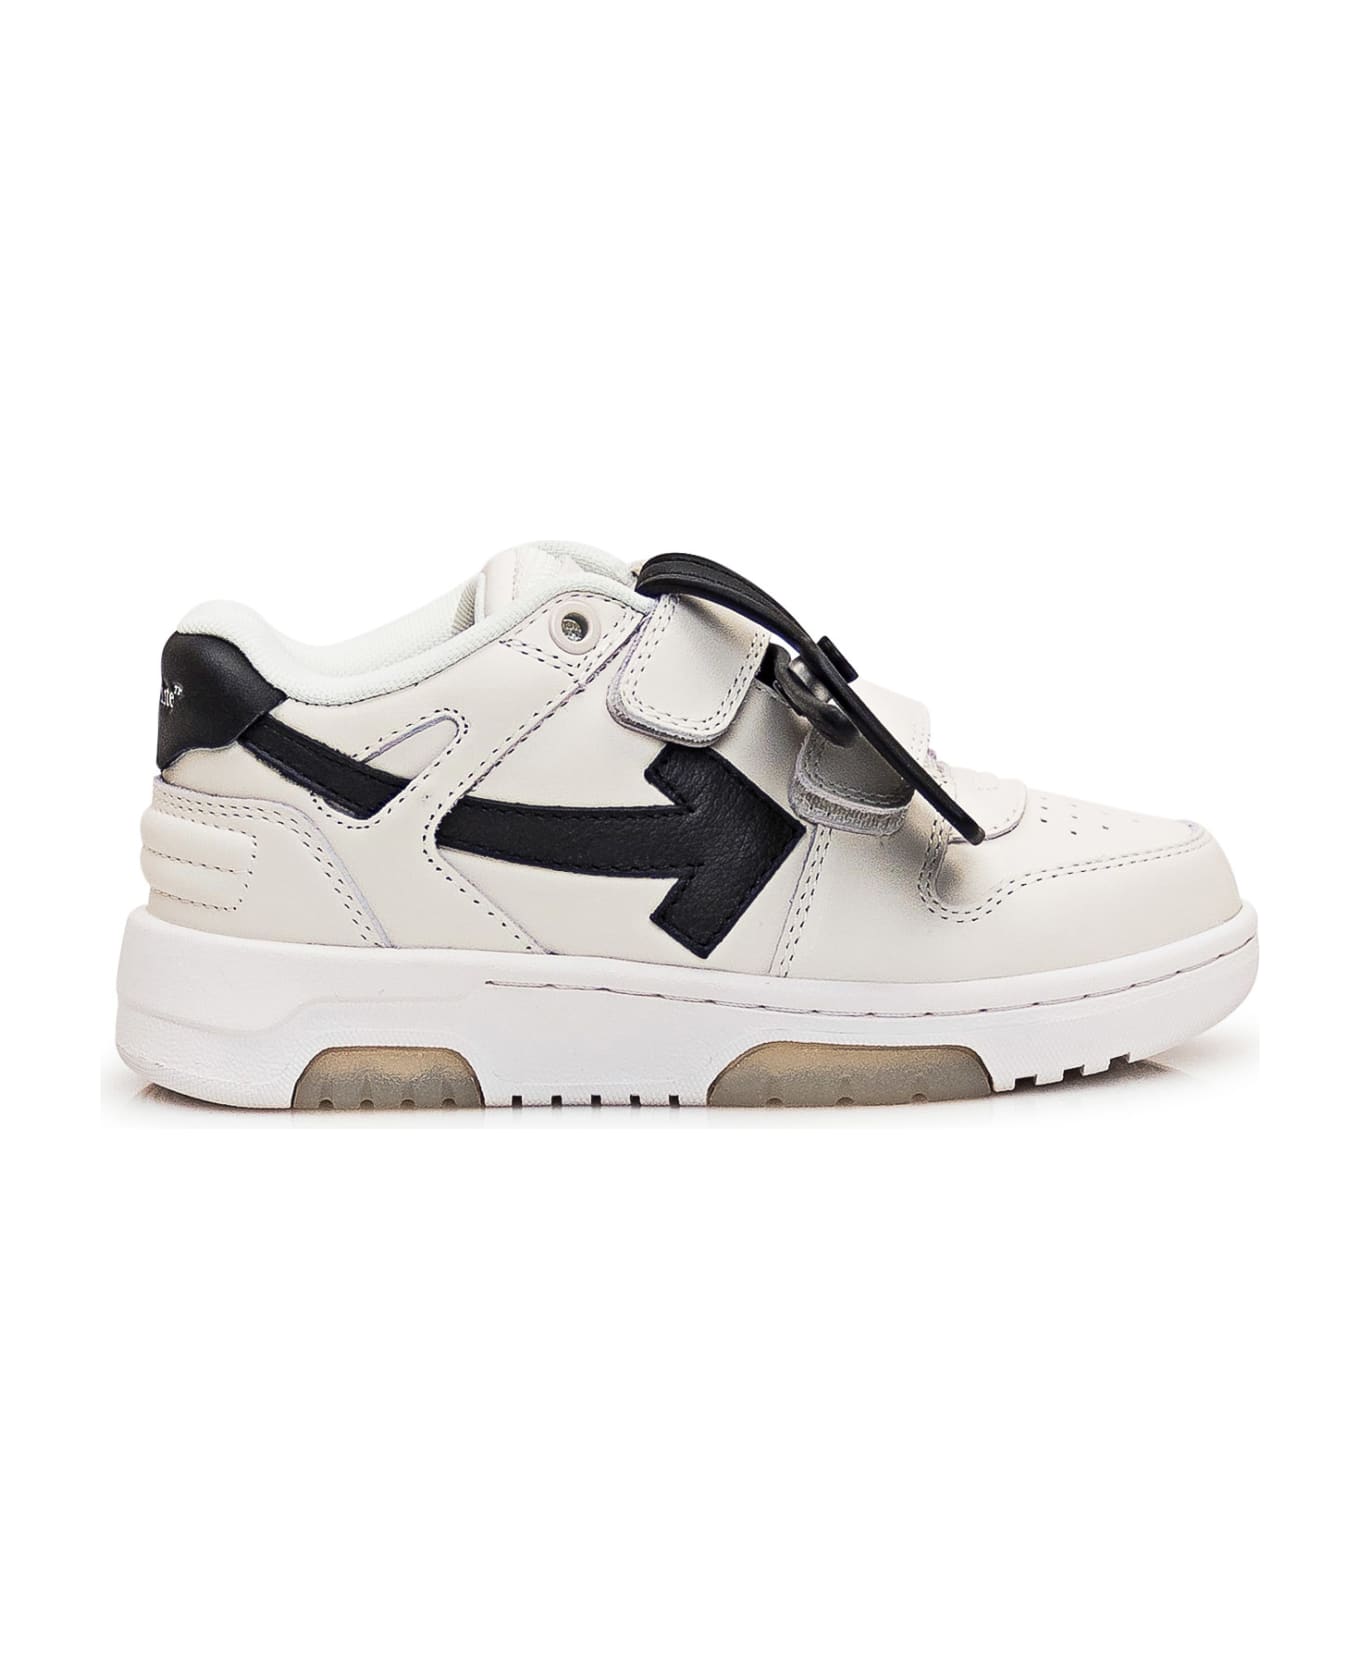 Off-White Out Of Office Sneaker - WHITE シューズ